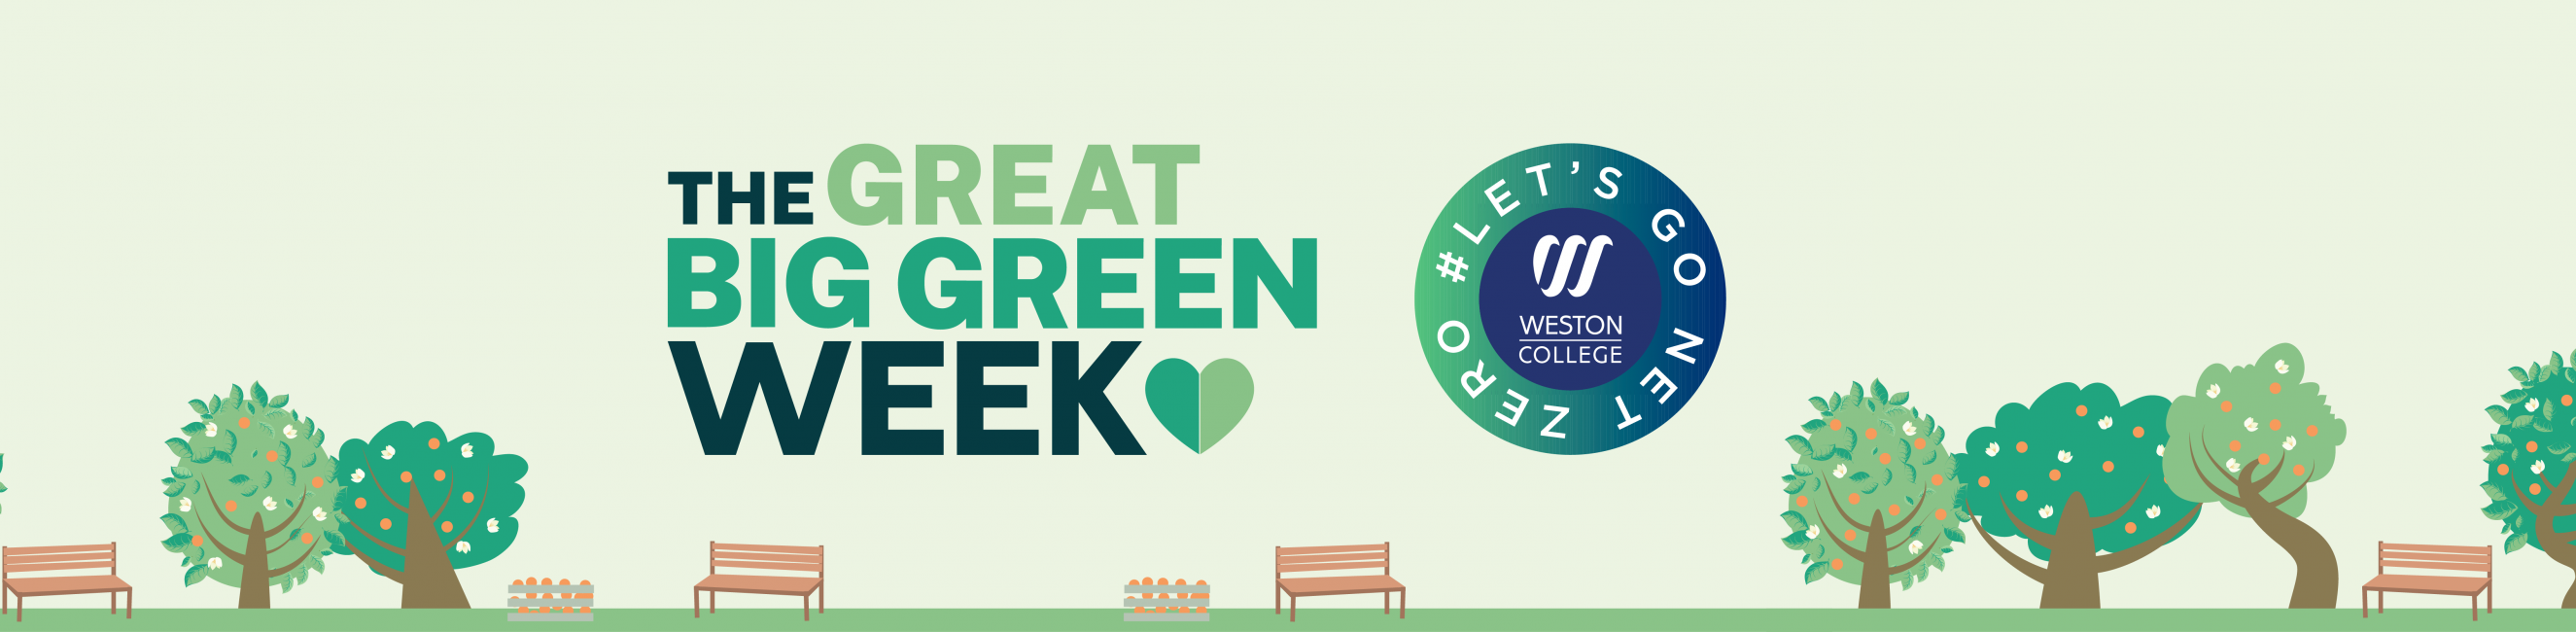 A graphic promoting the Great Big Green Week